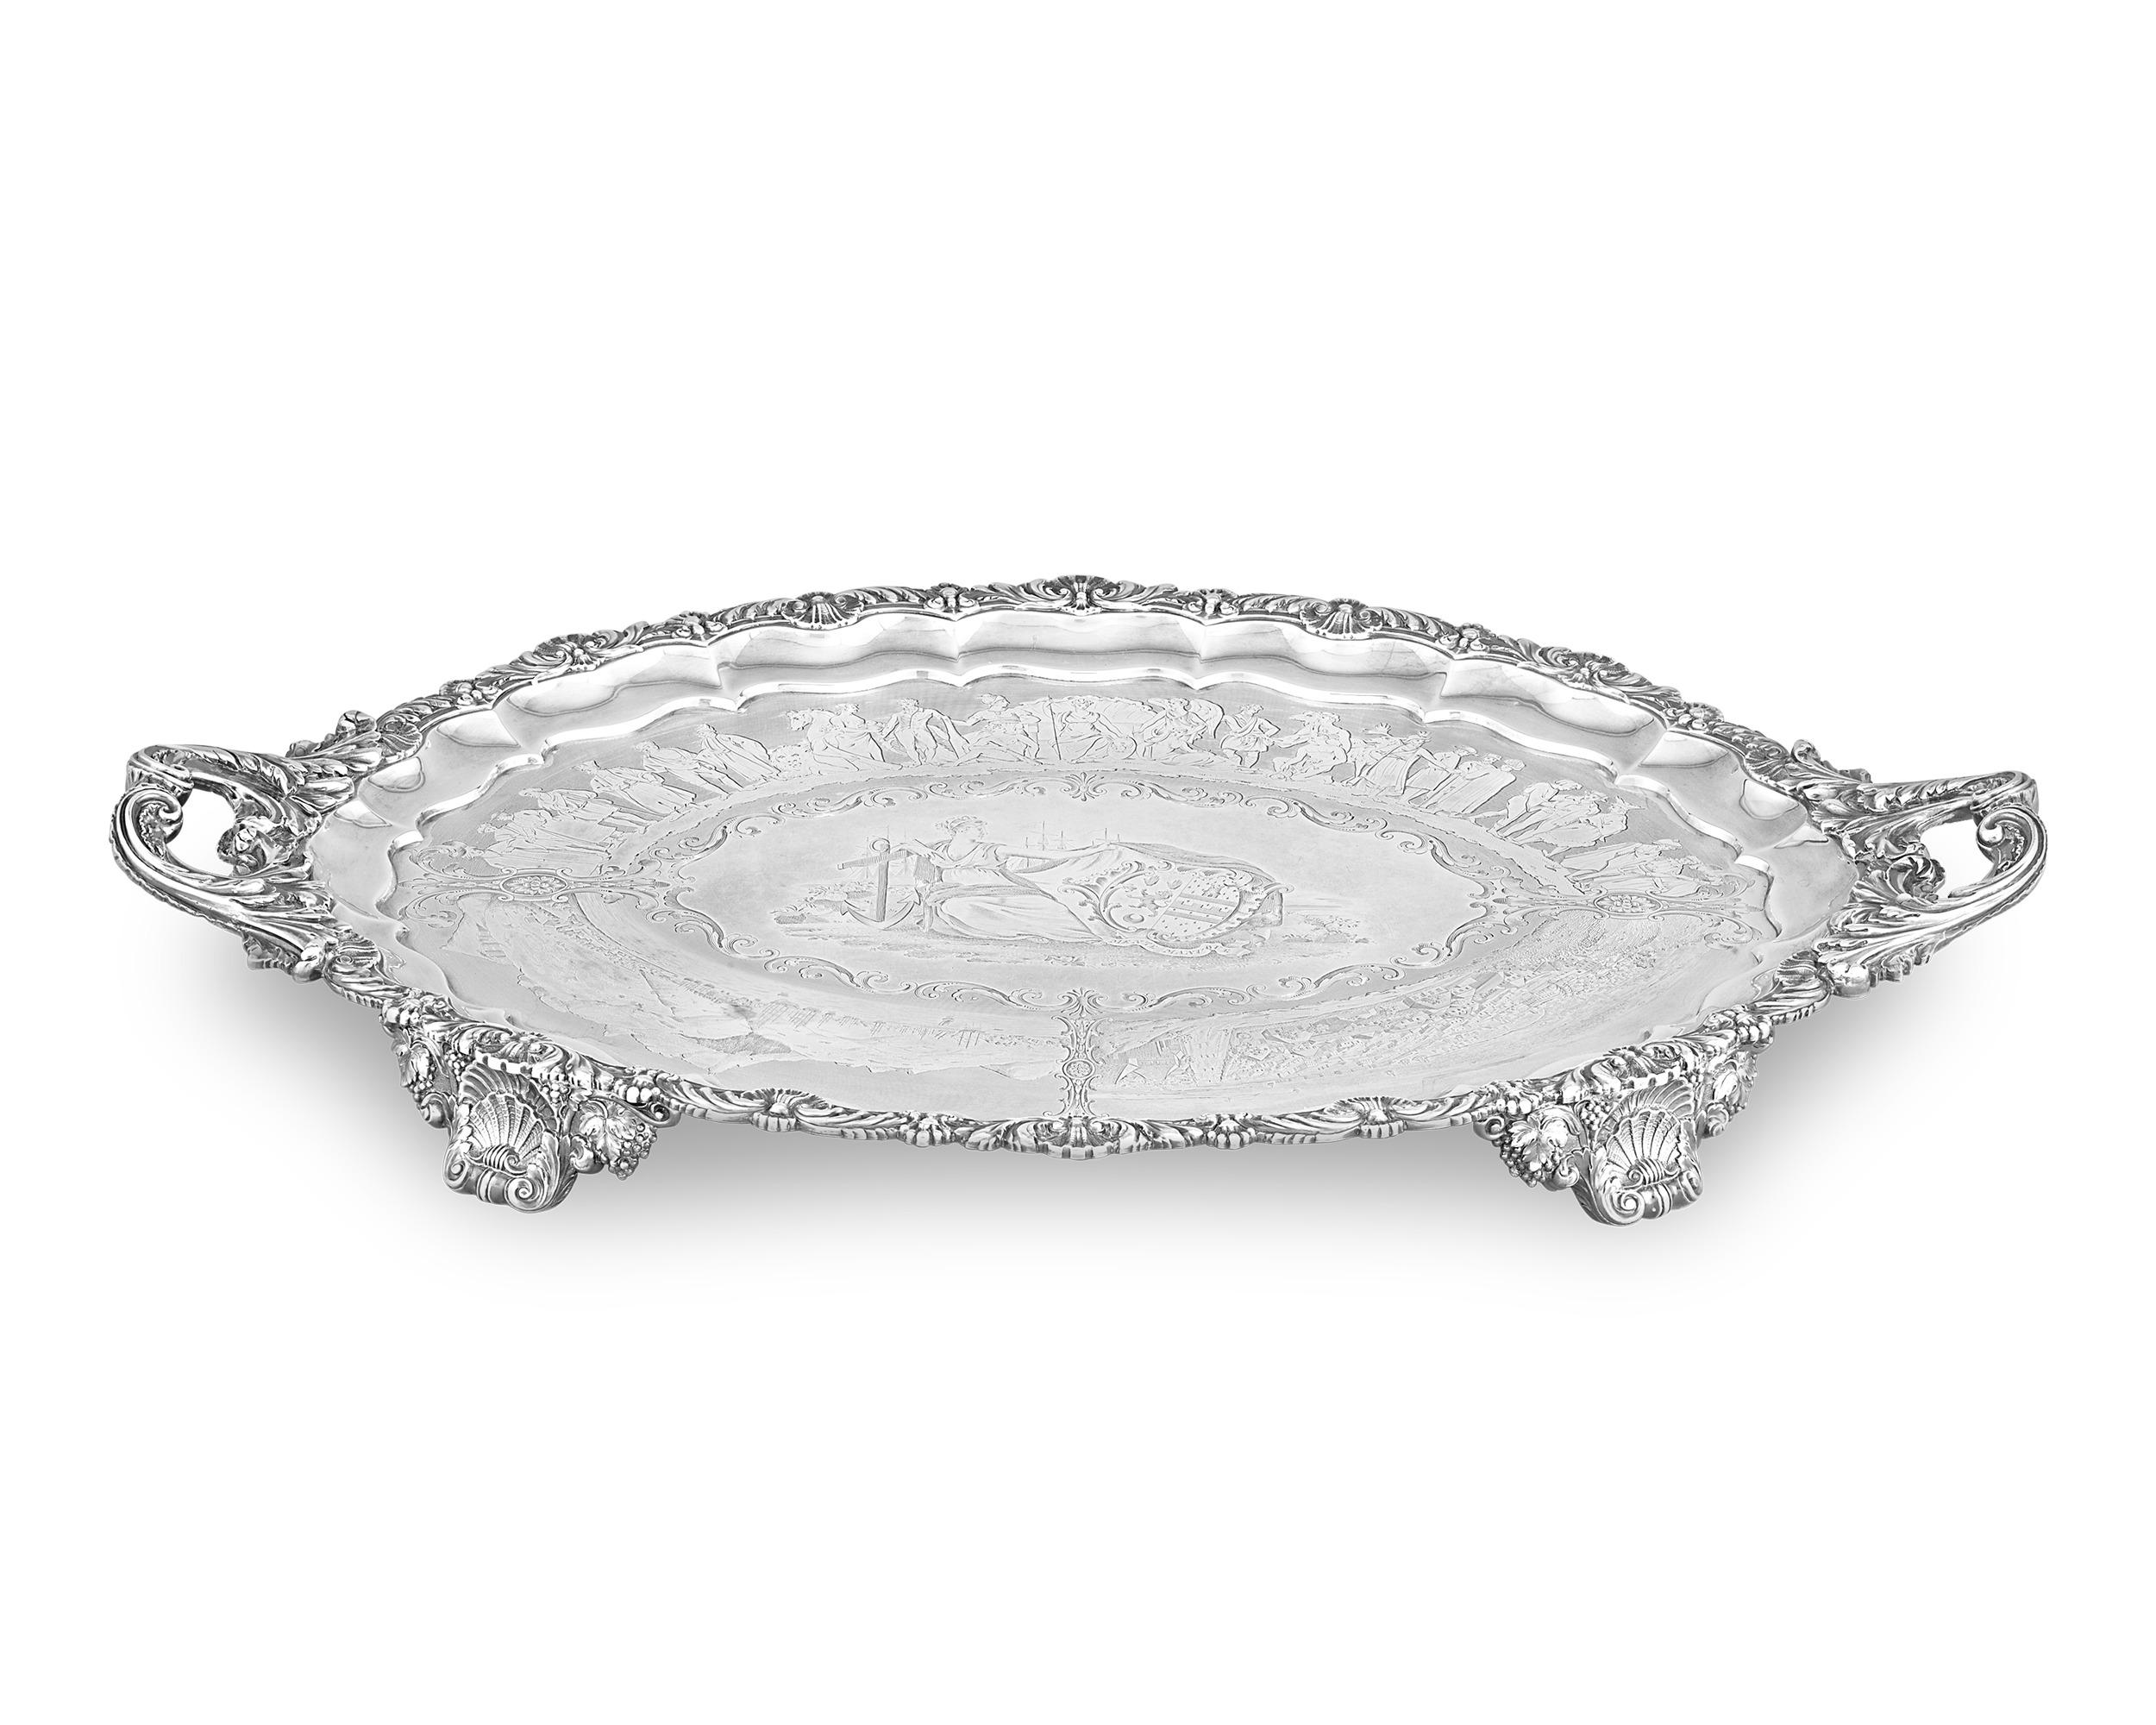 This highly important sterling silver tray by famed English silversmith Paul Storr was gifted by the isles of Mauritius to its famed abolitionist leader, Sir Robert Townsend Farquhar. Exceptional in its quality and beauty, the commemorative tray